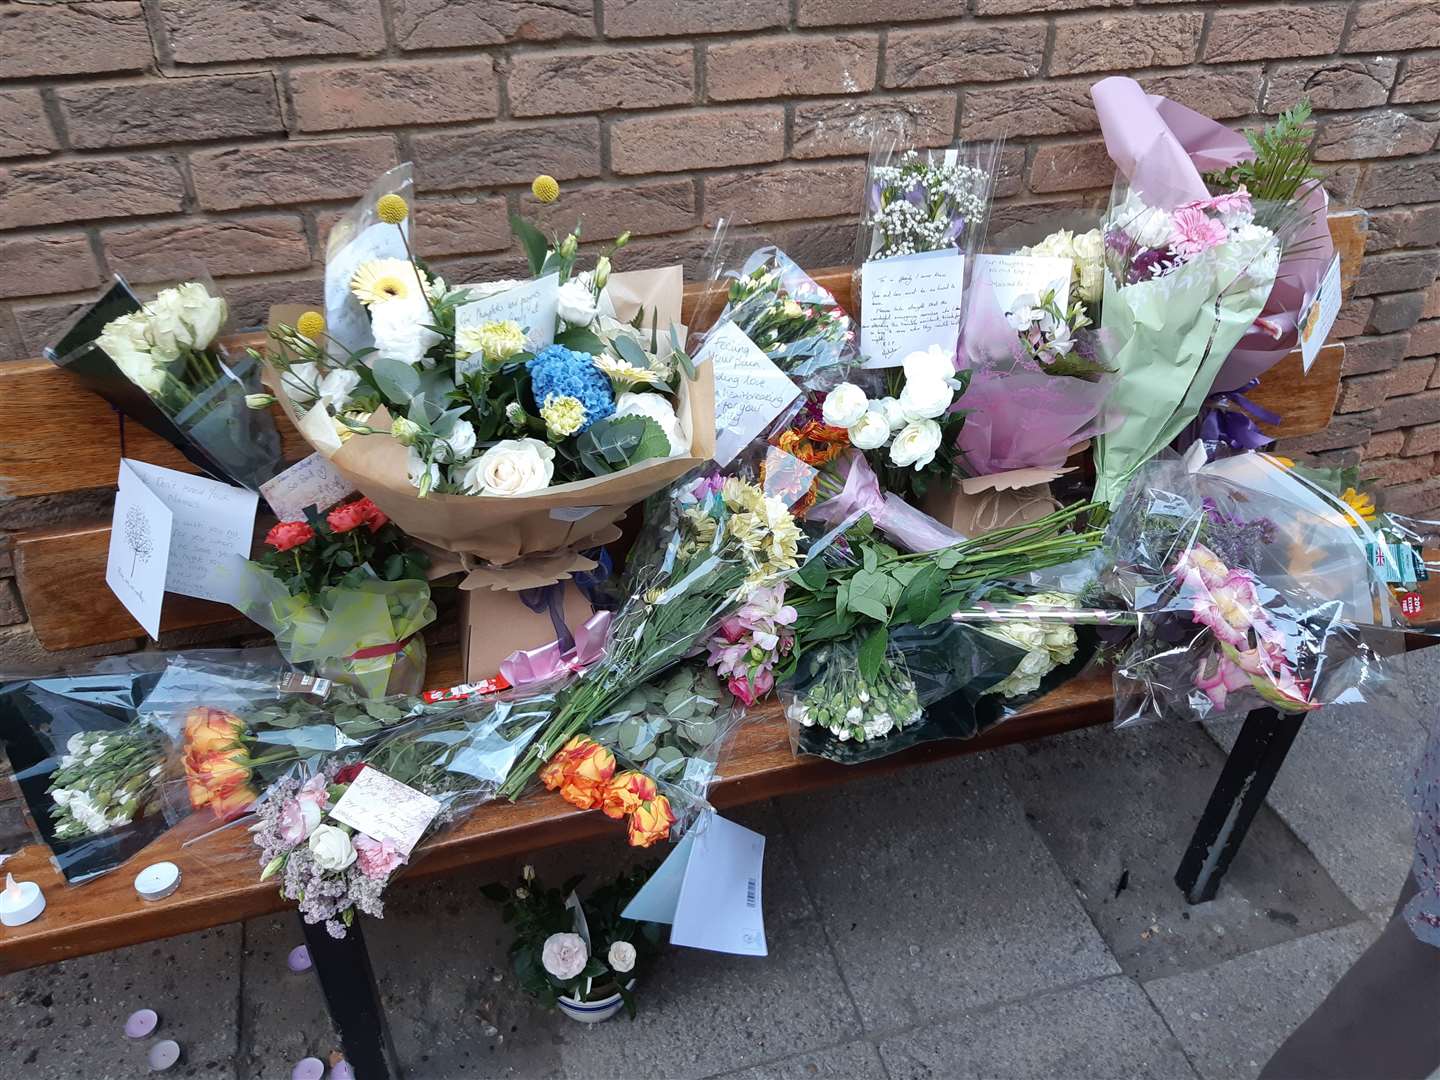 Floral tributes at the scene of the Ramsgate tragedy